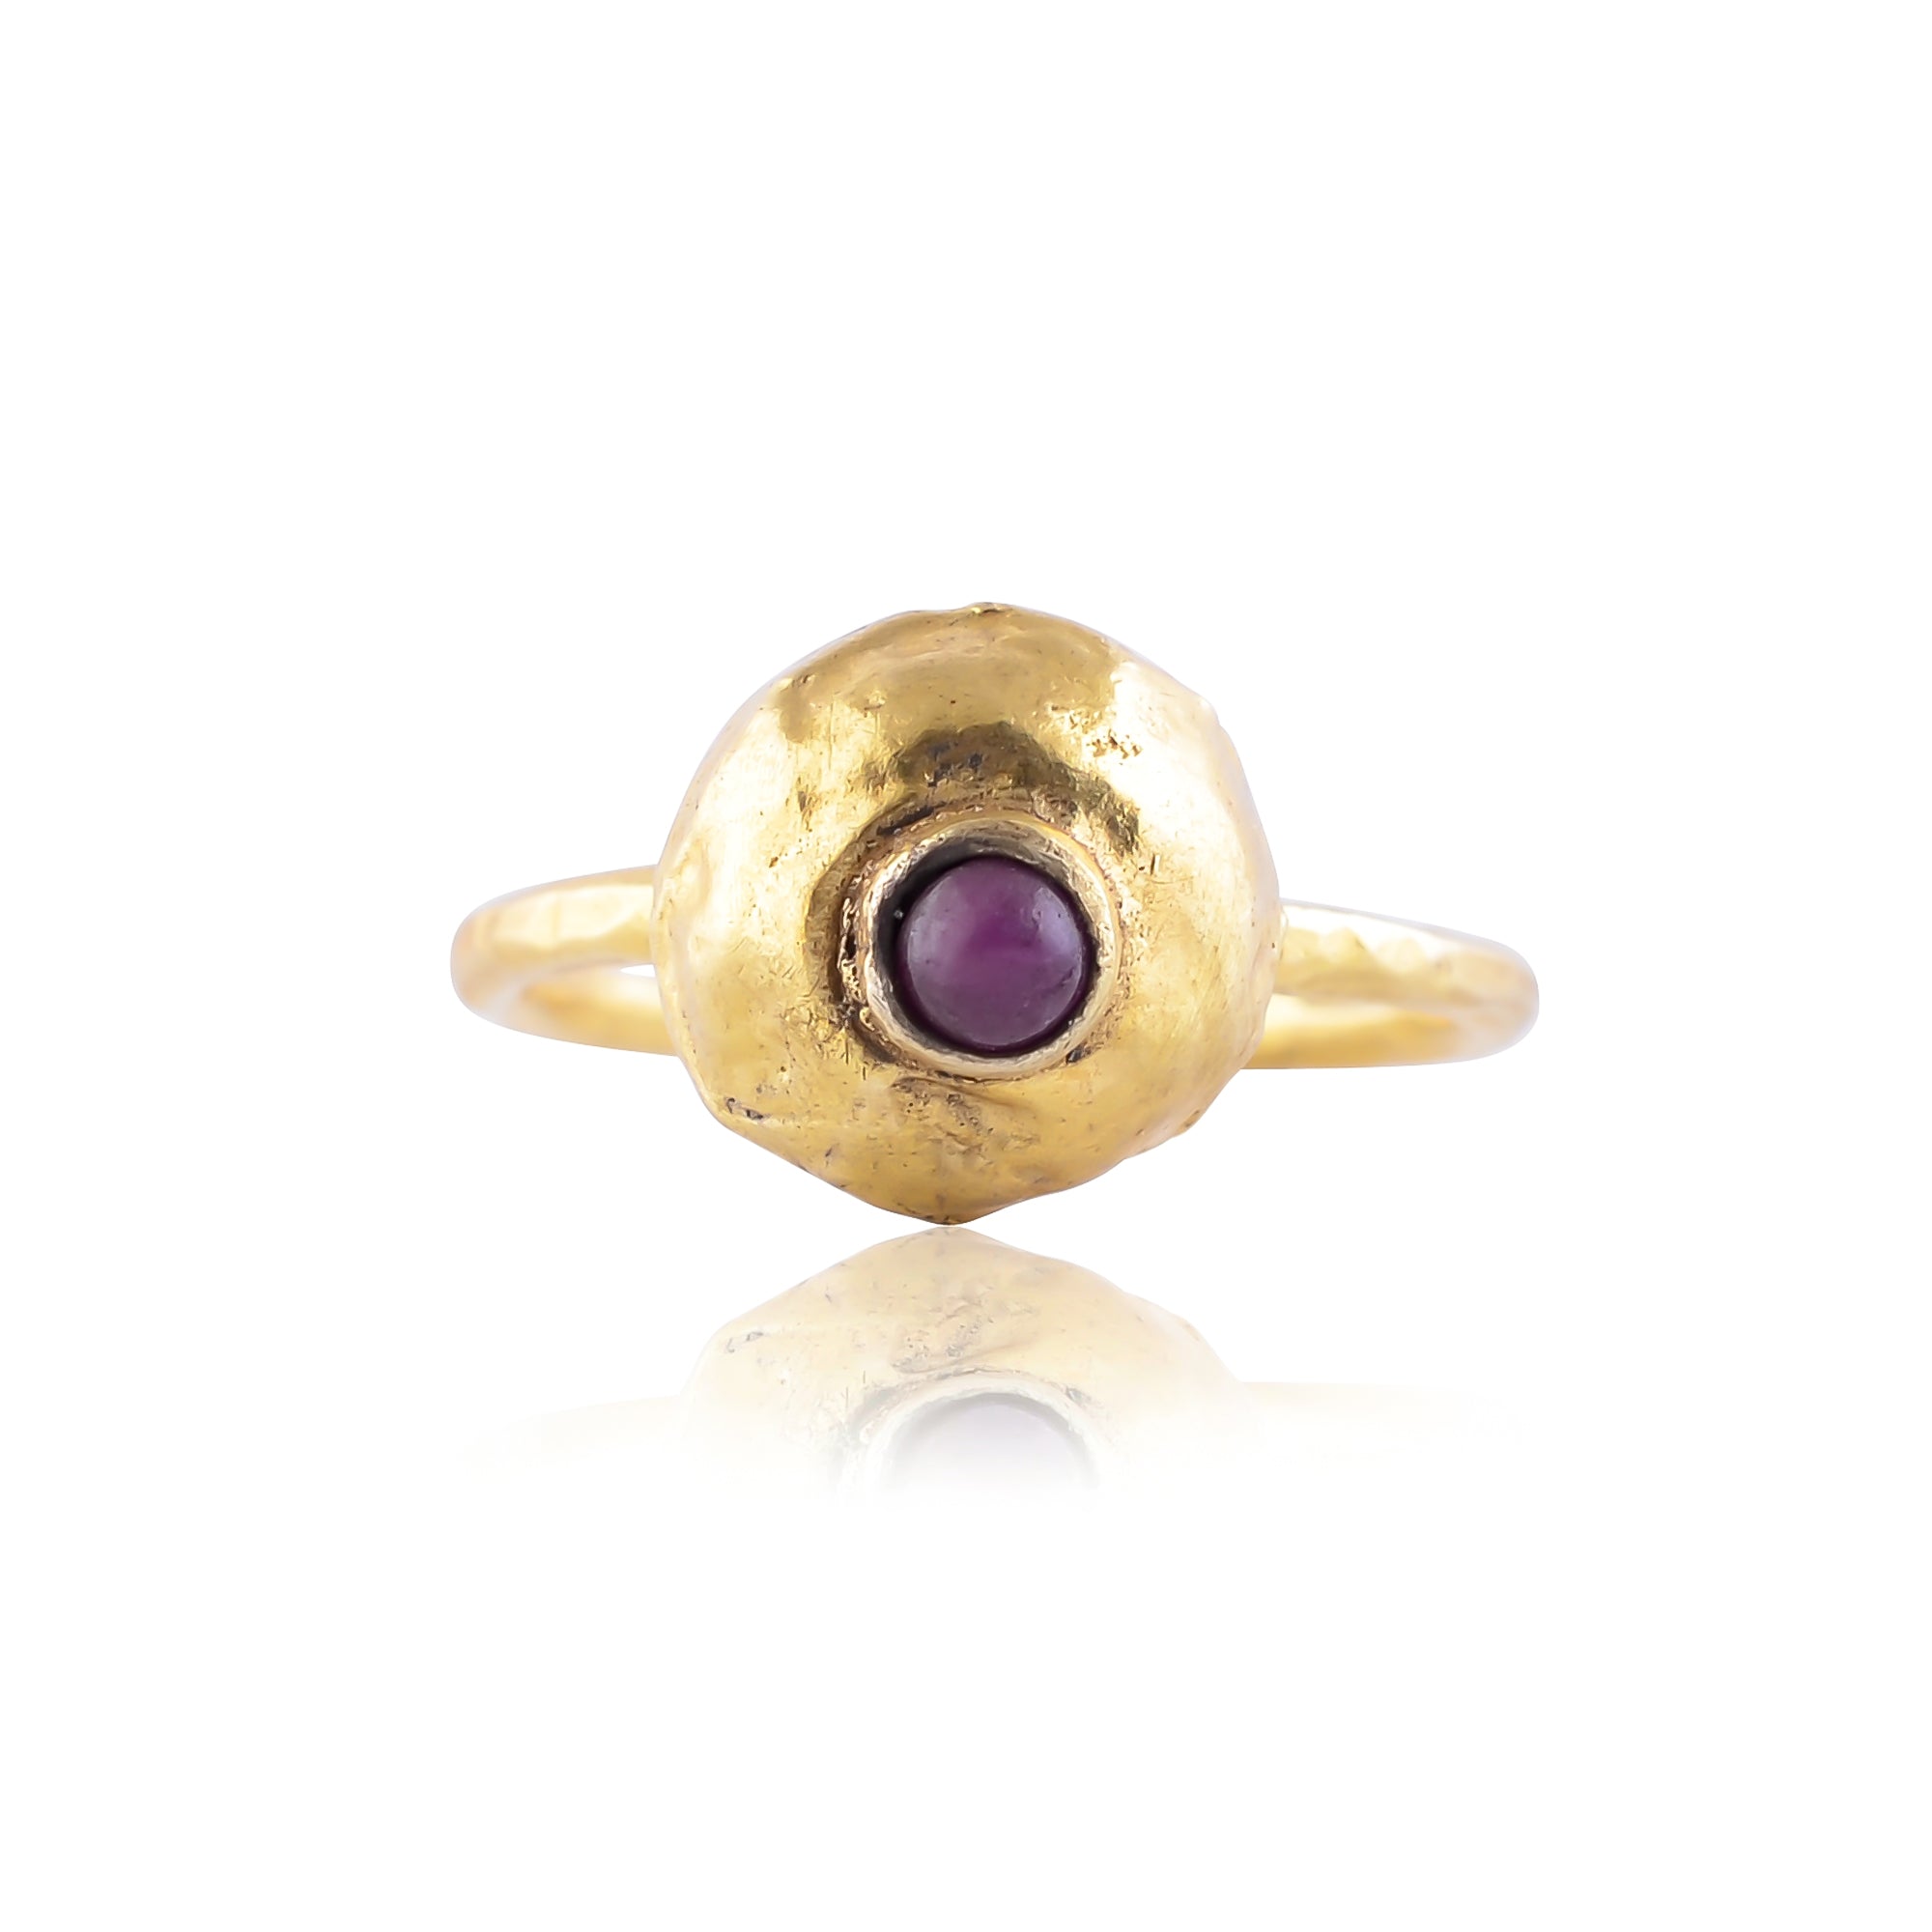 Buy Handmade Silver Gold Plated Ruby Ring